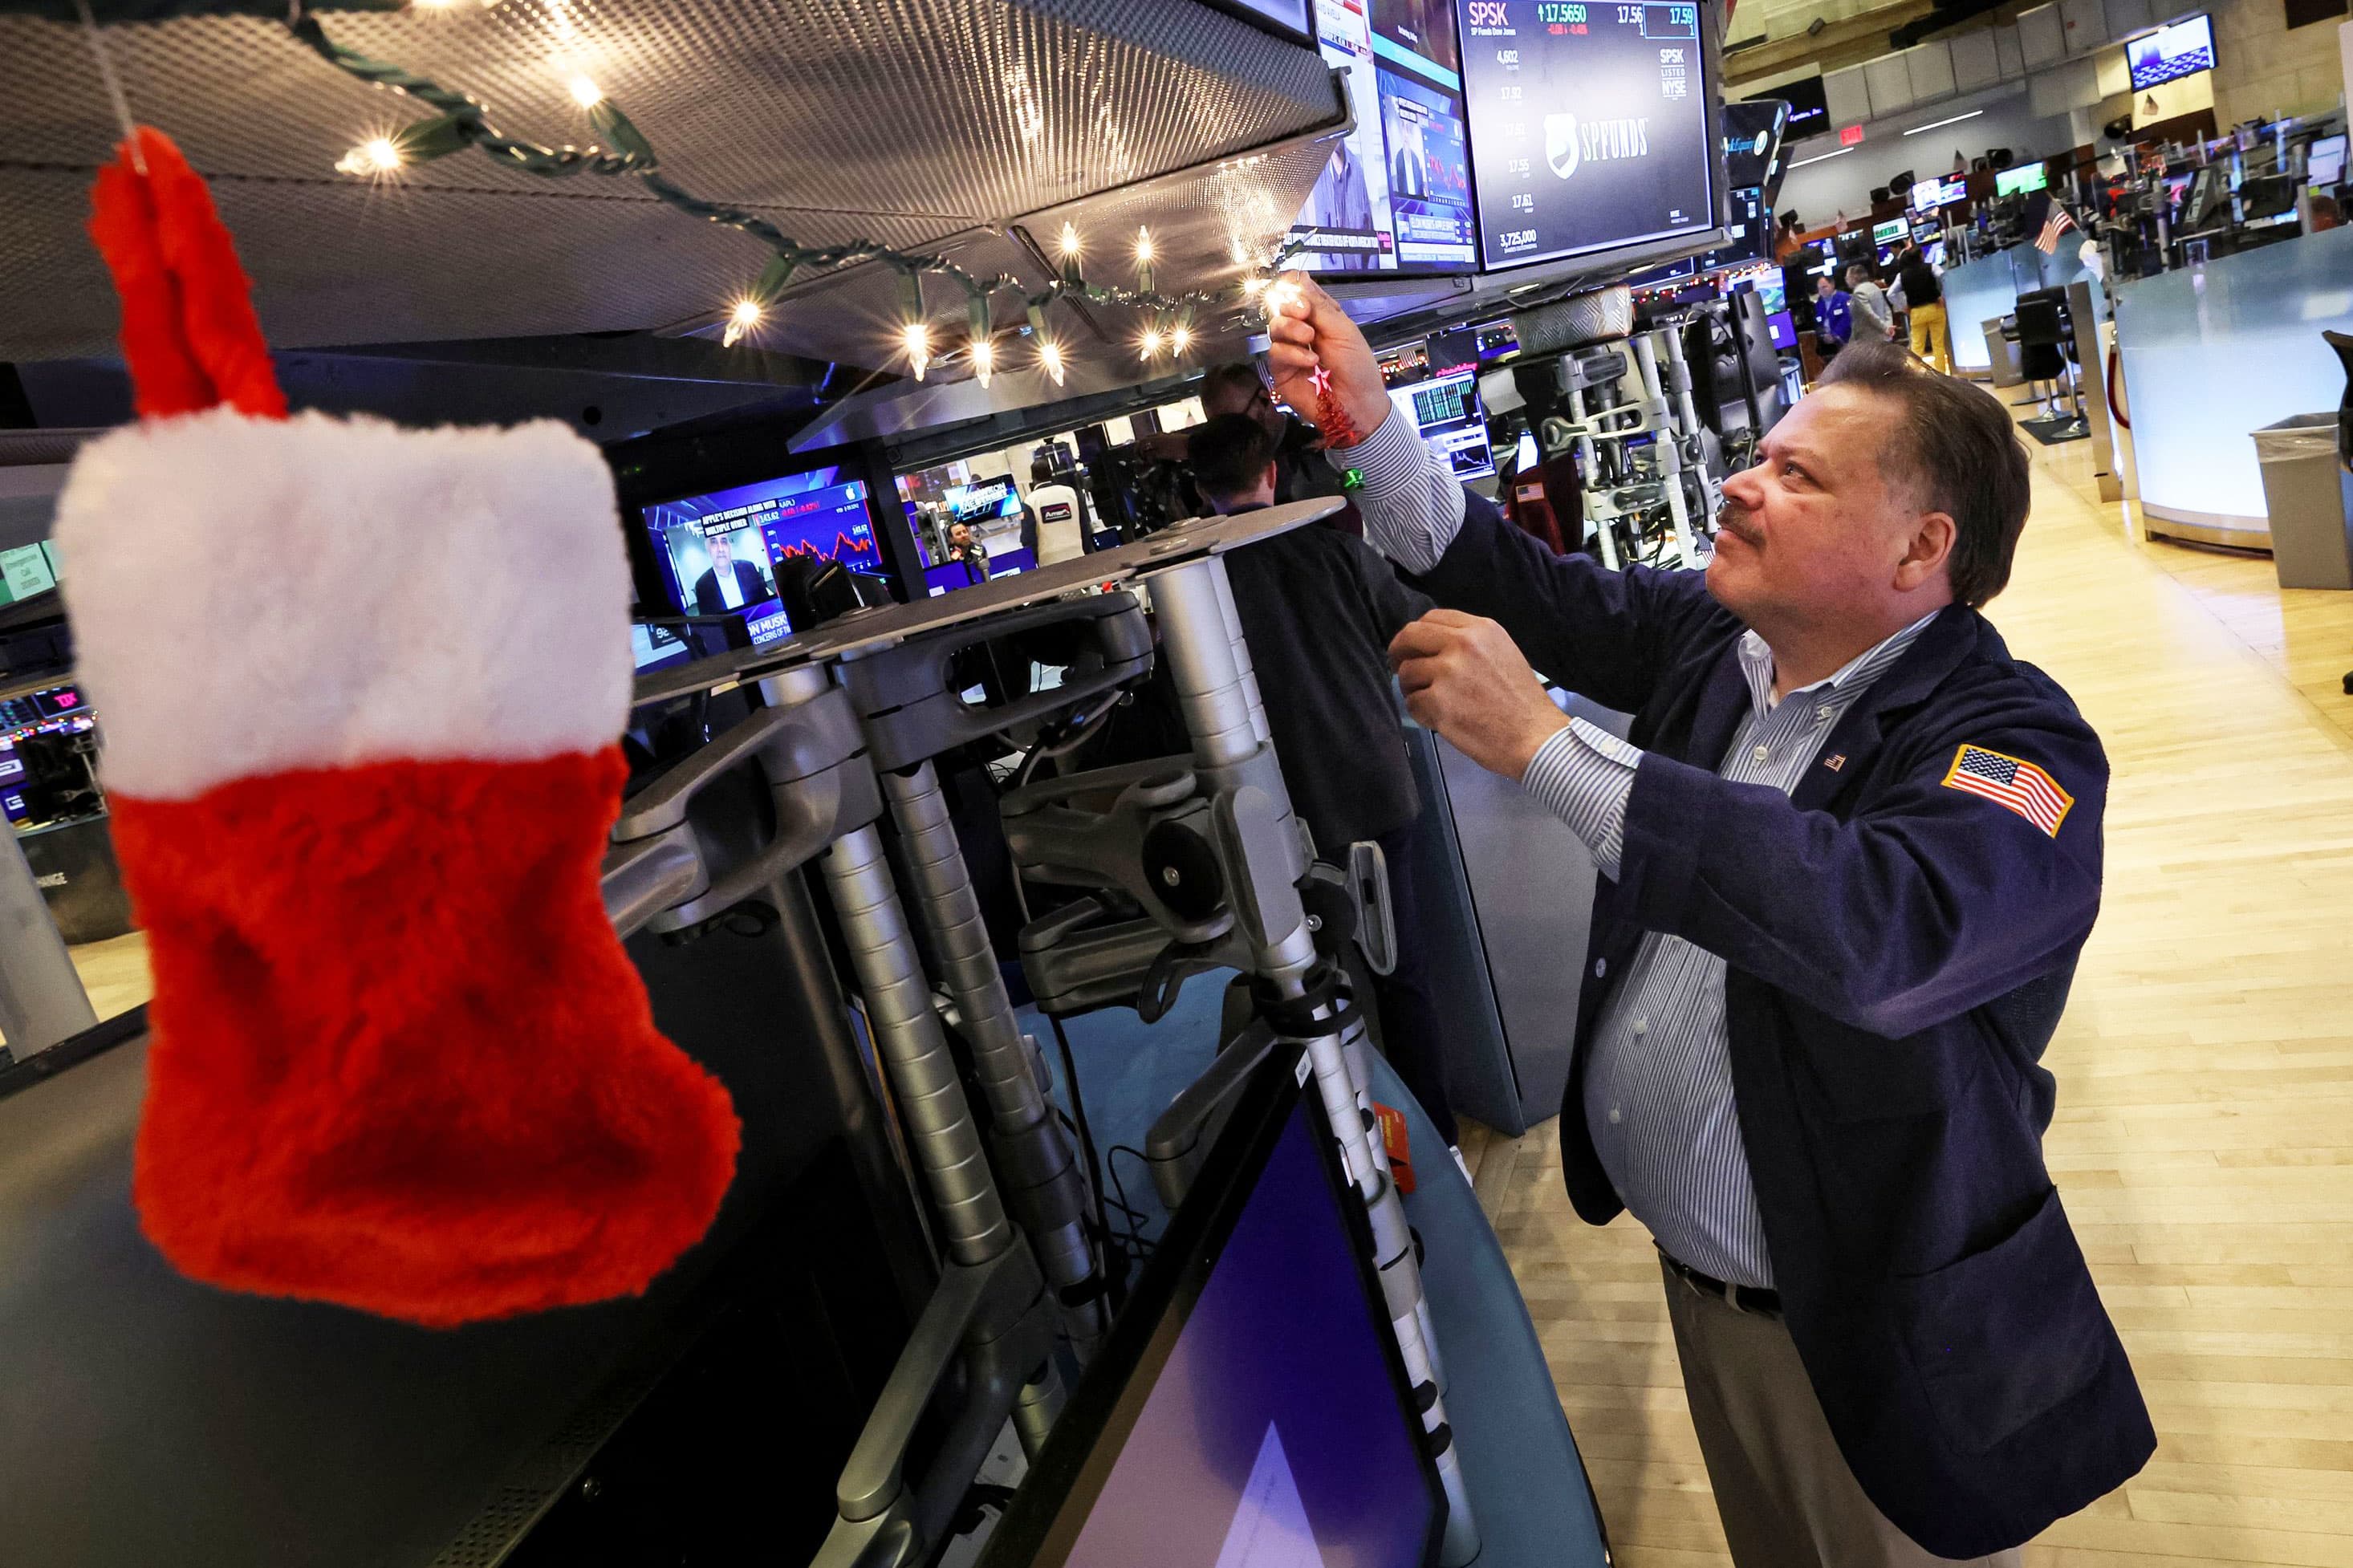 The traditional December boom for stocks may be more elusive, but it's still possible